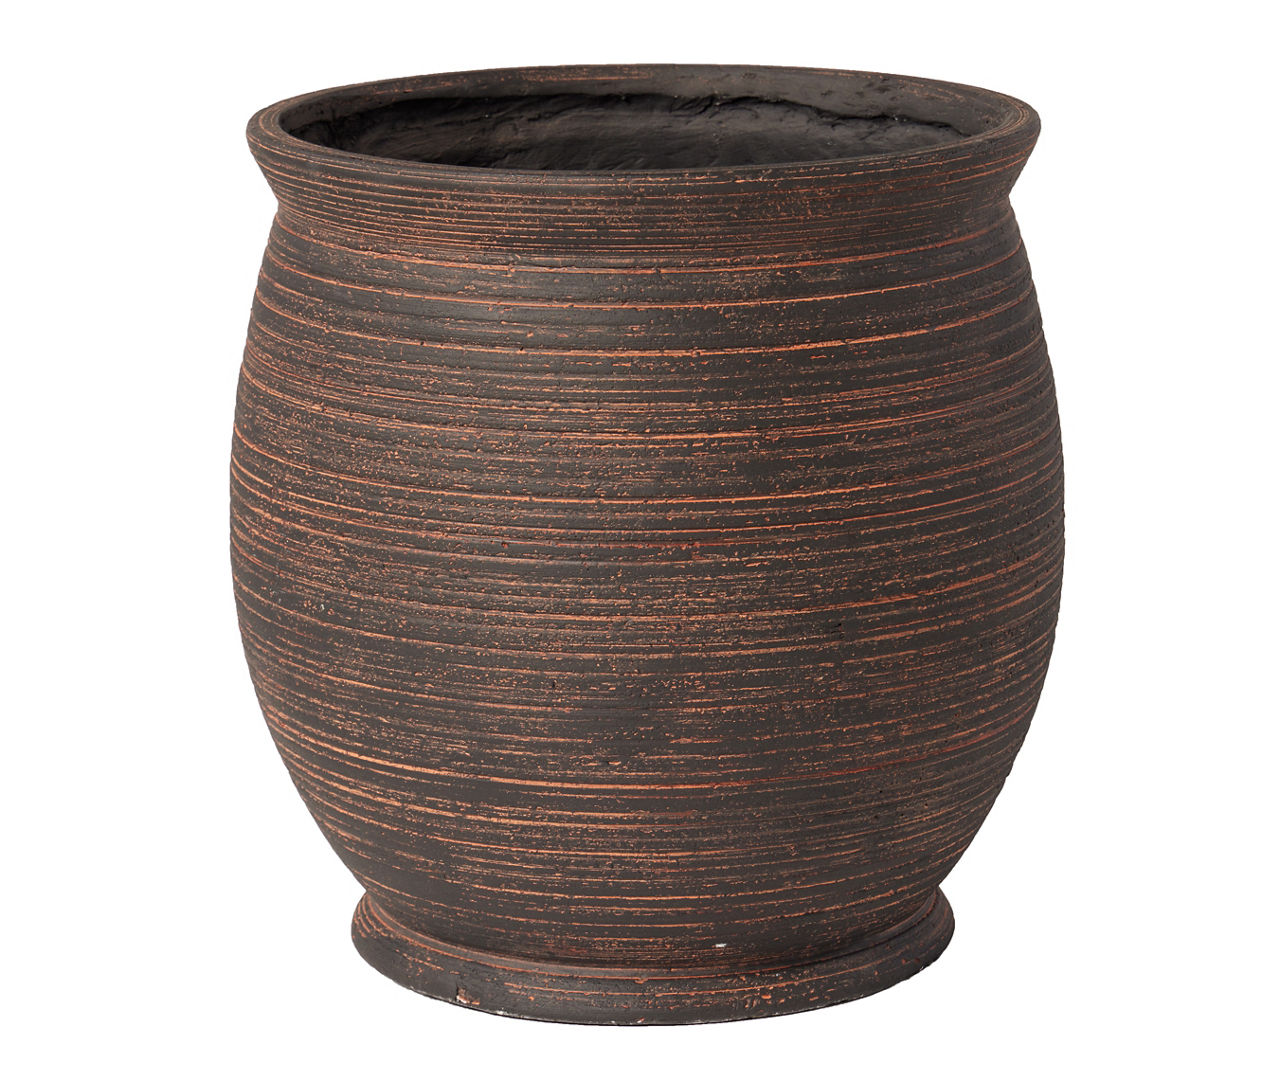 14" Brown Pottery Planter